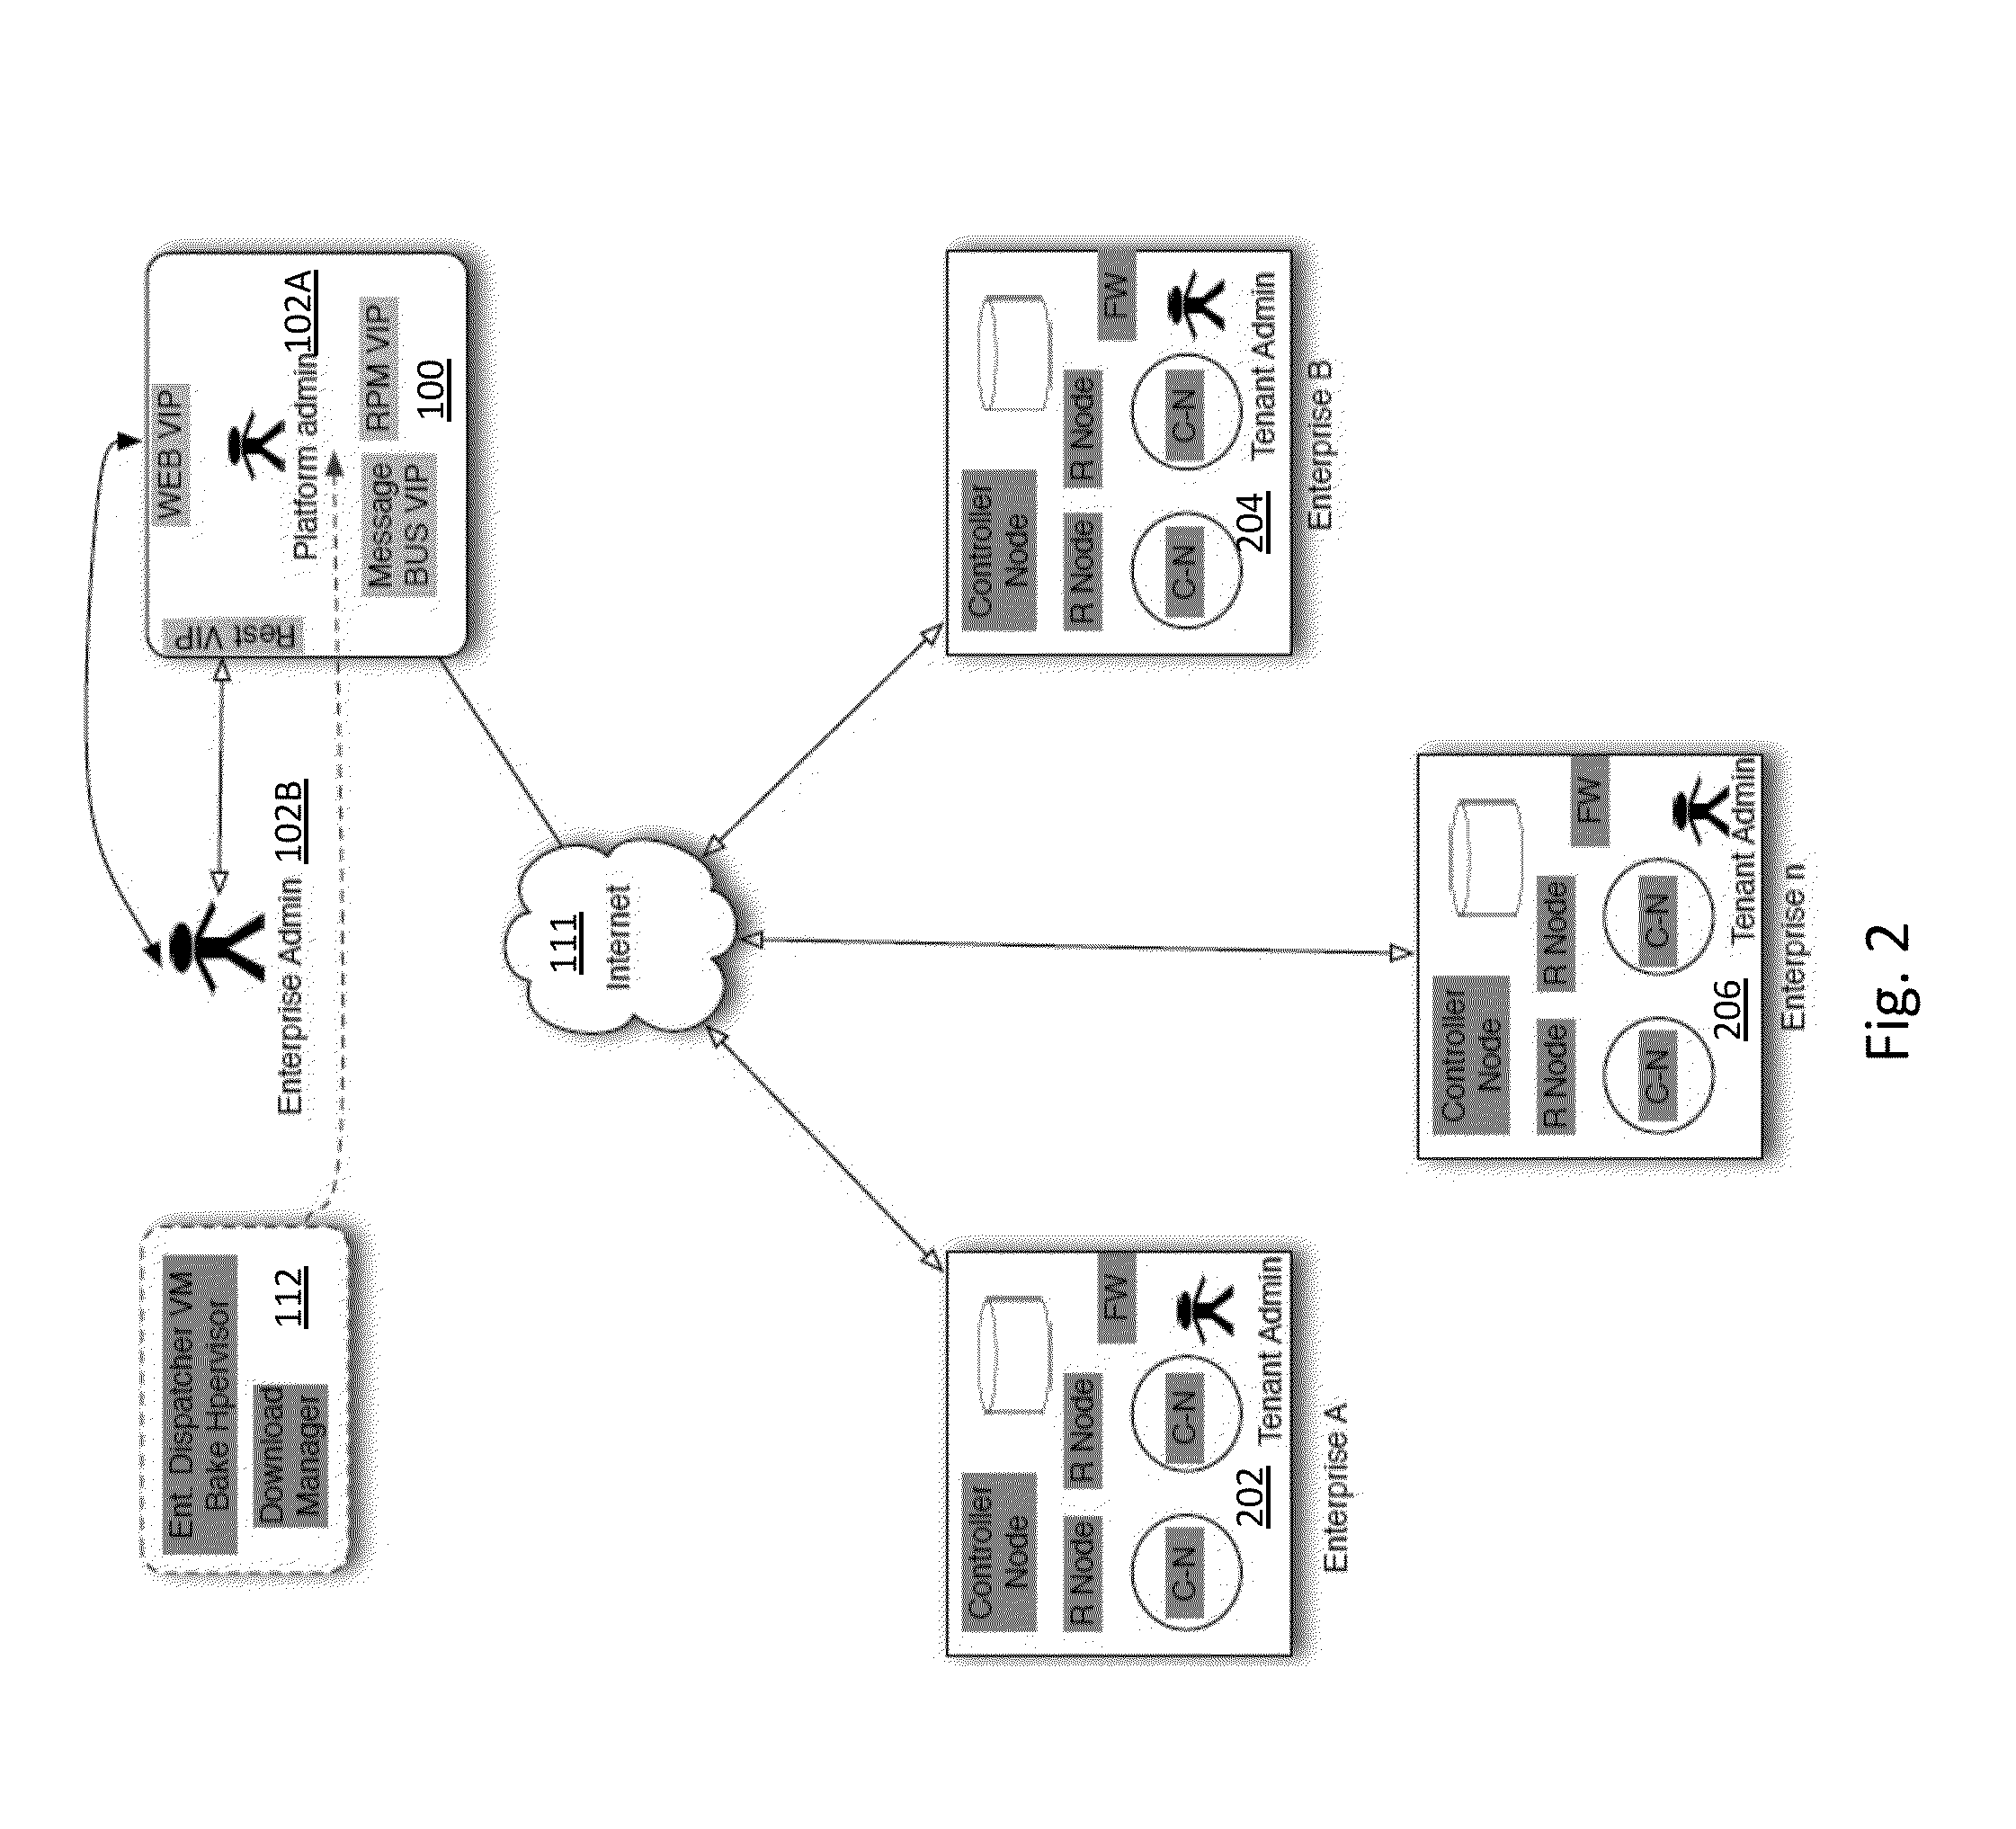 Method and Apparatus to Choose a Best Match Cloud Provisioning Server